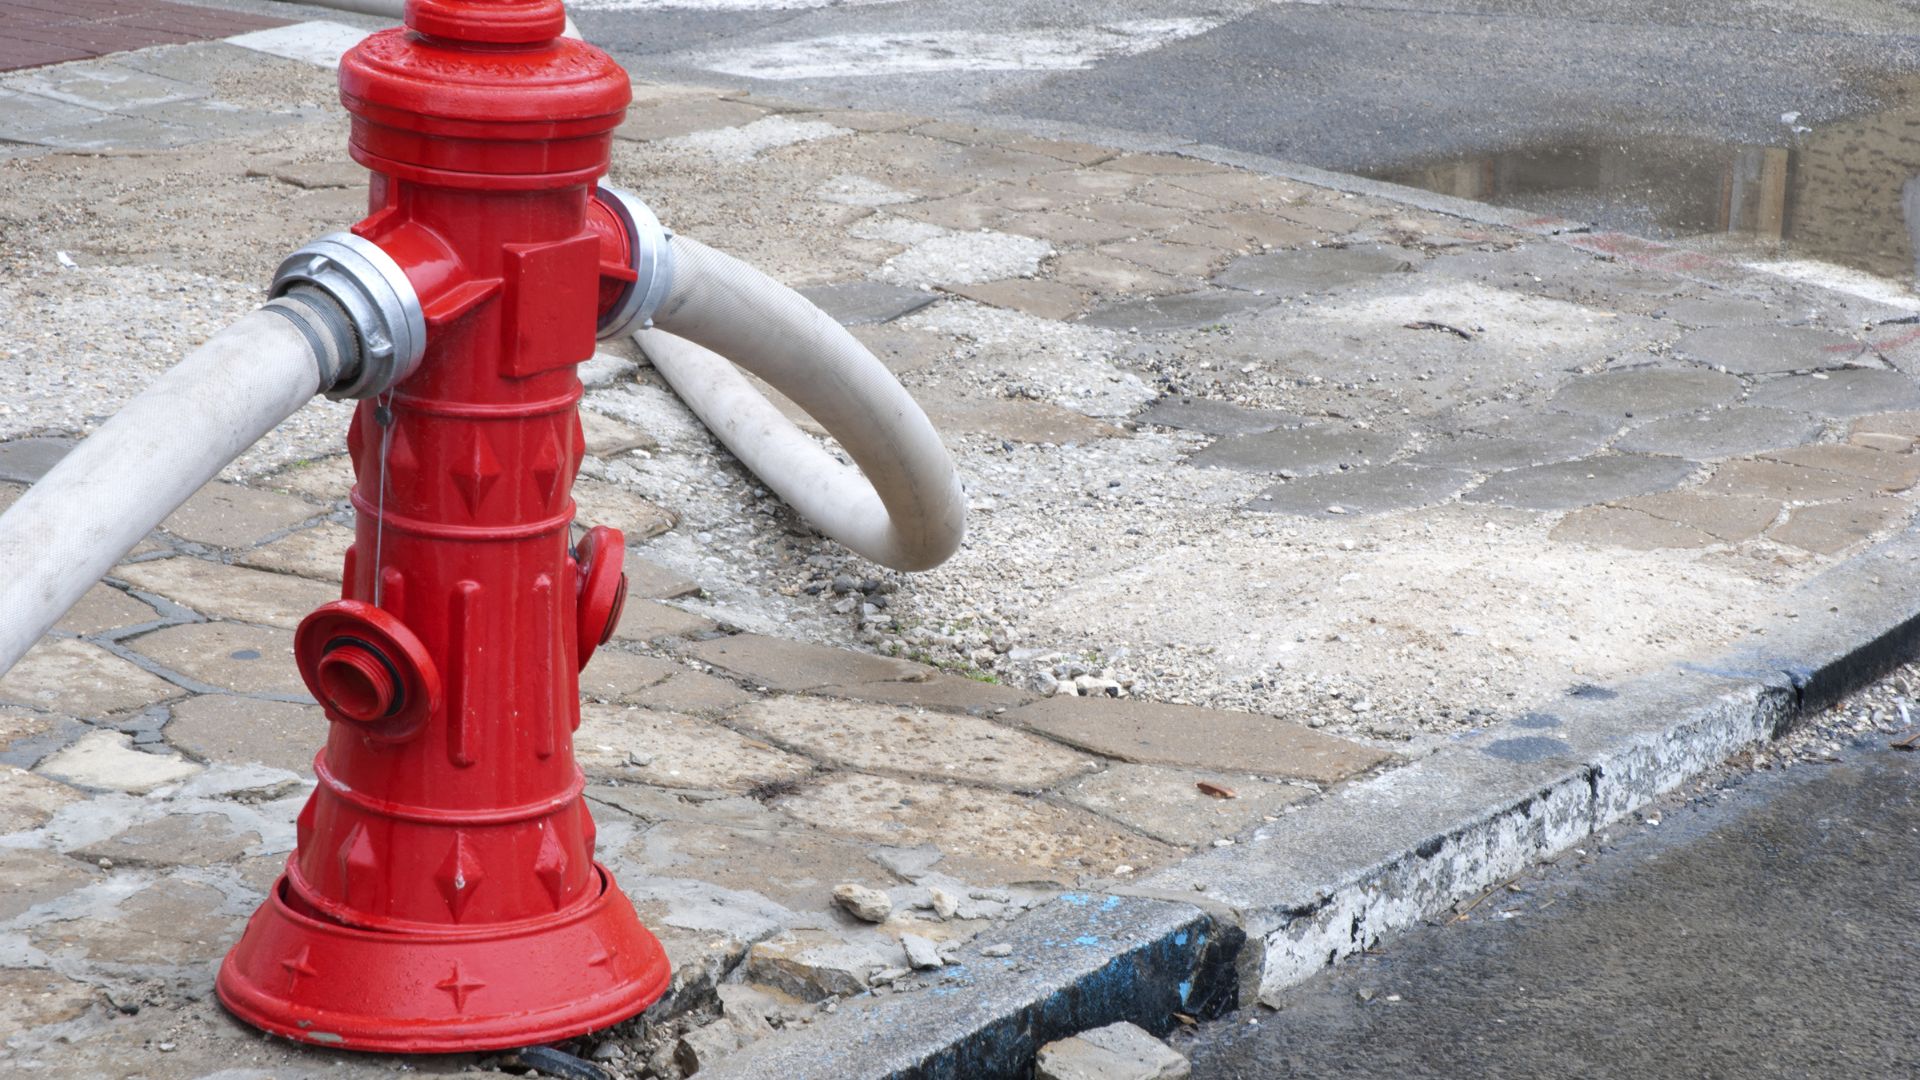 Choosing thе Right Firе Hydrant Suppliеr for Your Nееds